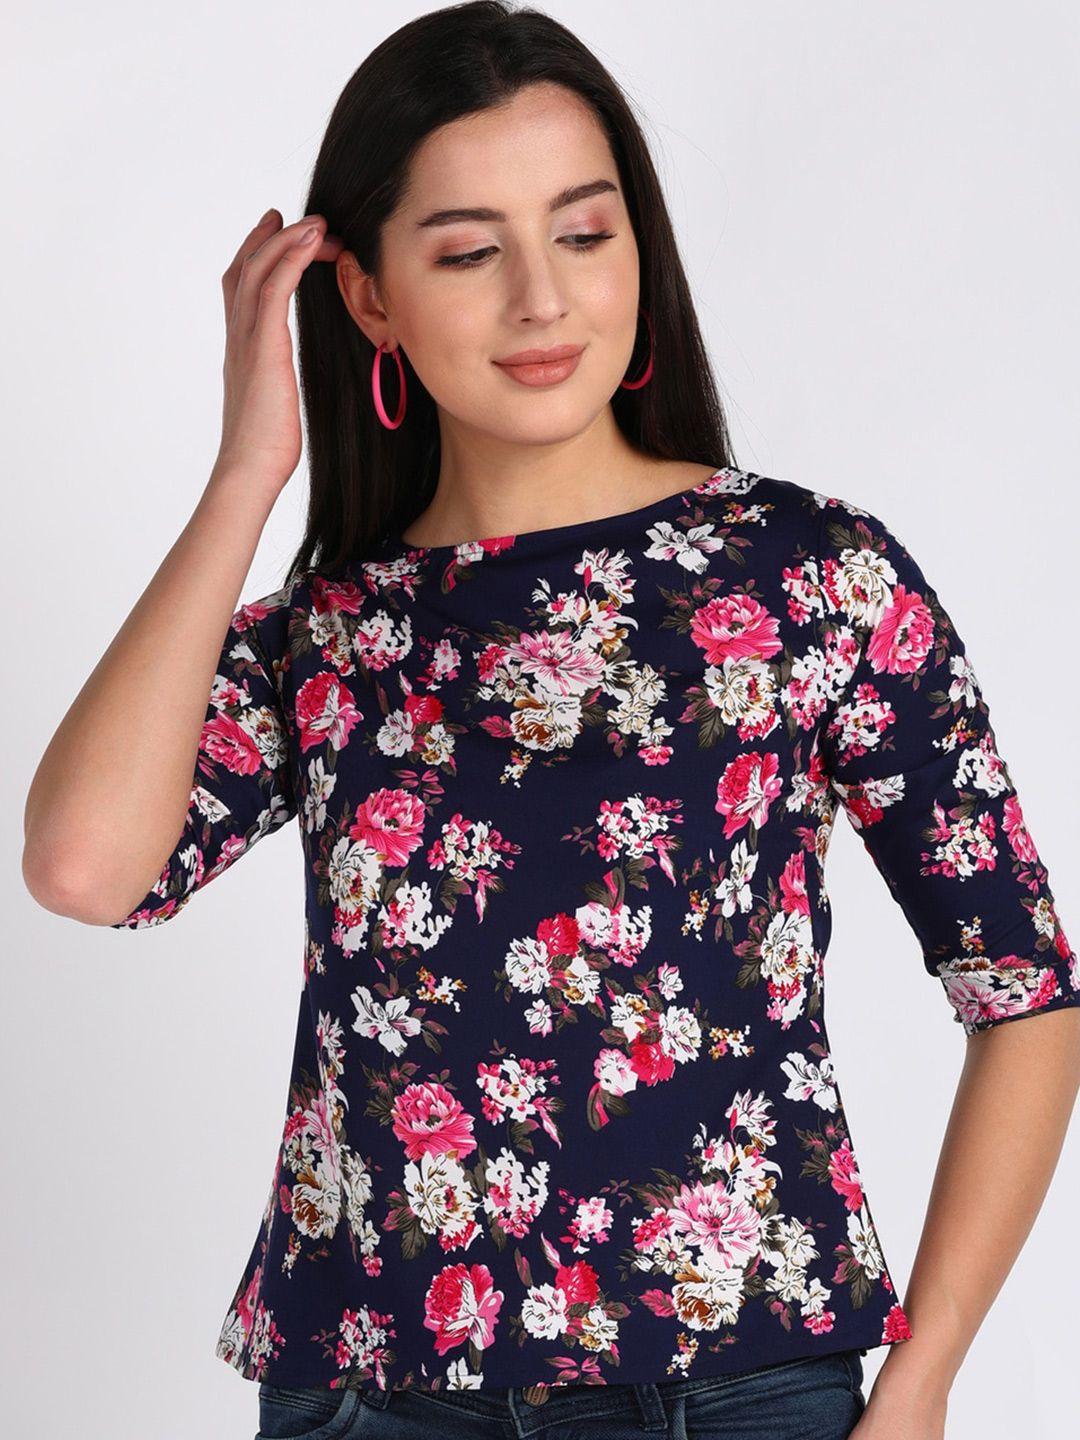 vahson floral printed boat neck top